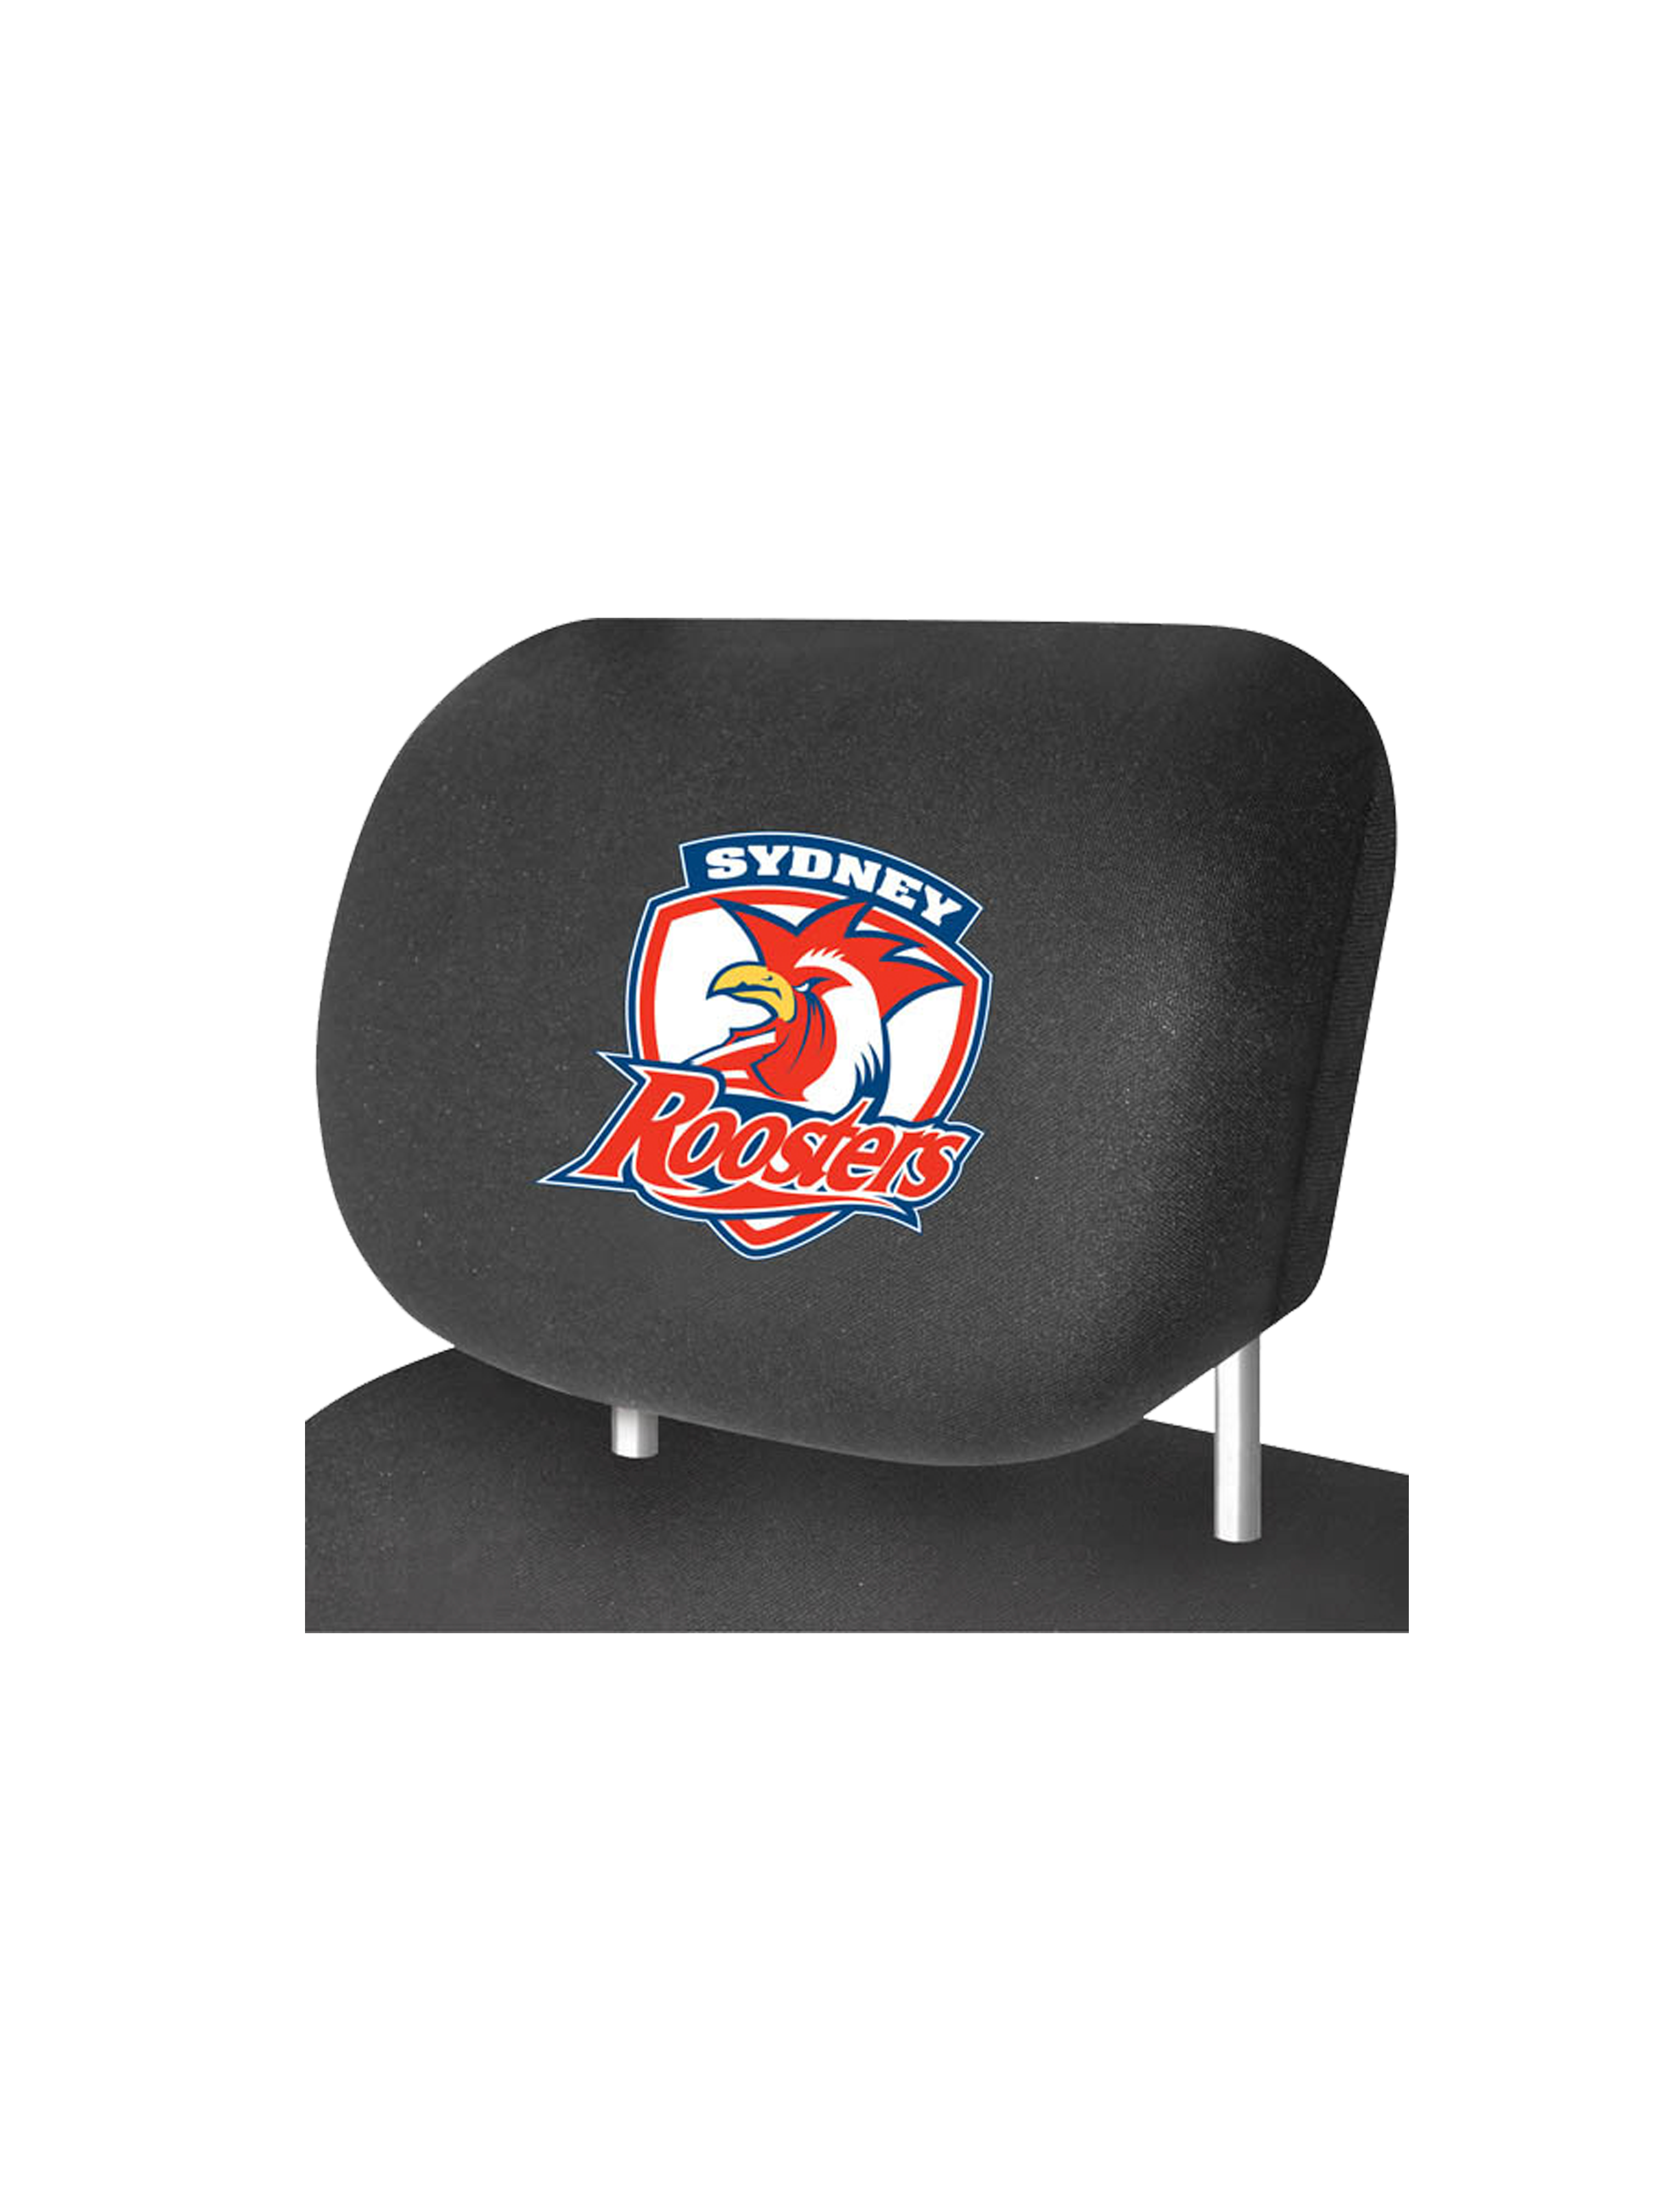 Sydney Roosters Official Headrest Cover